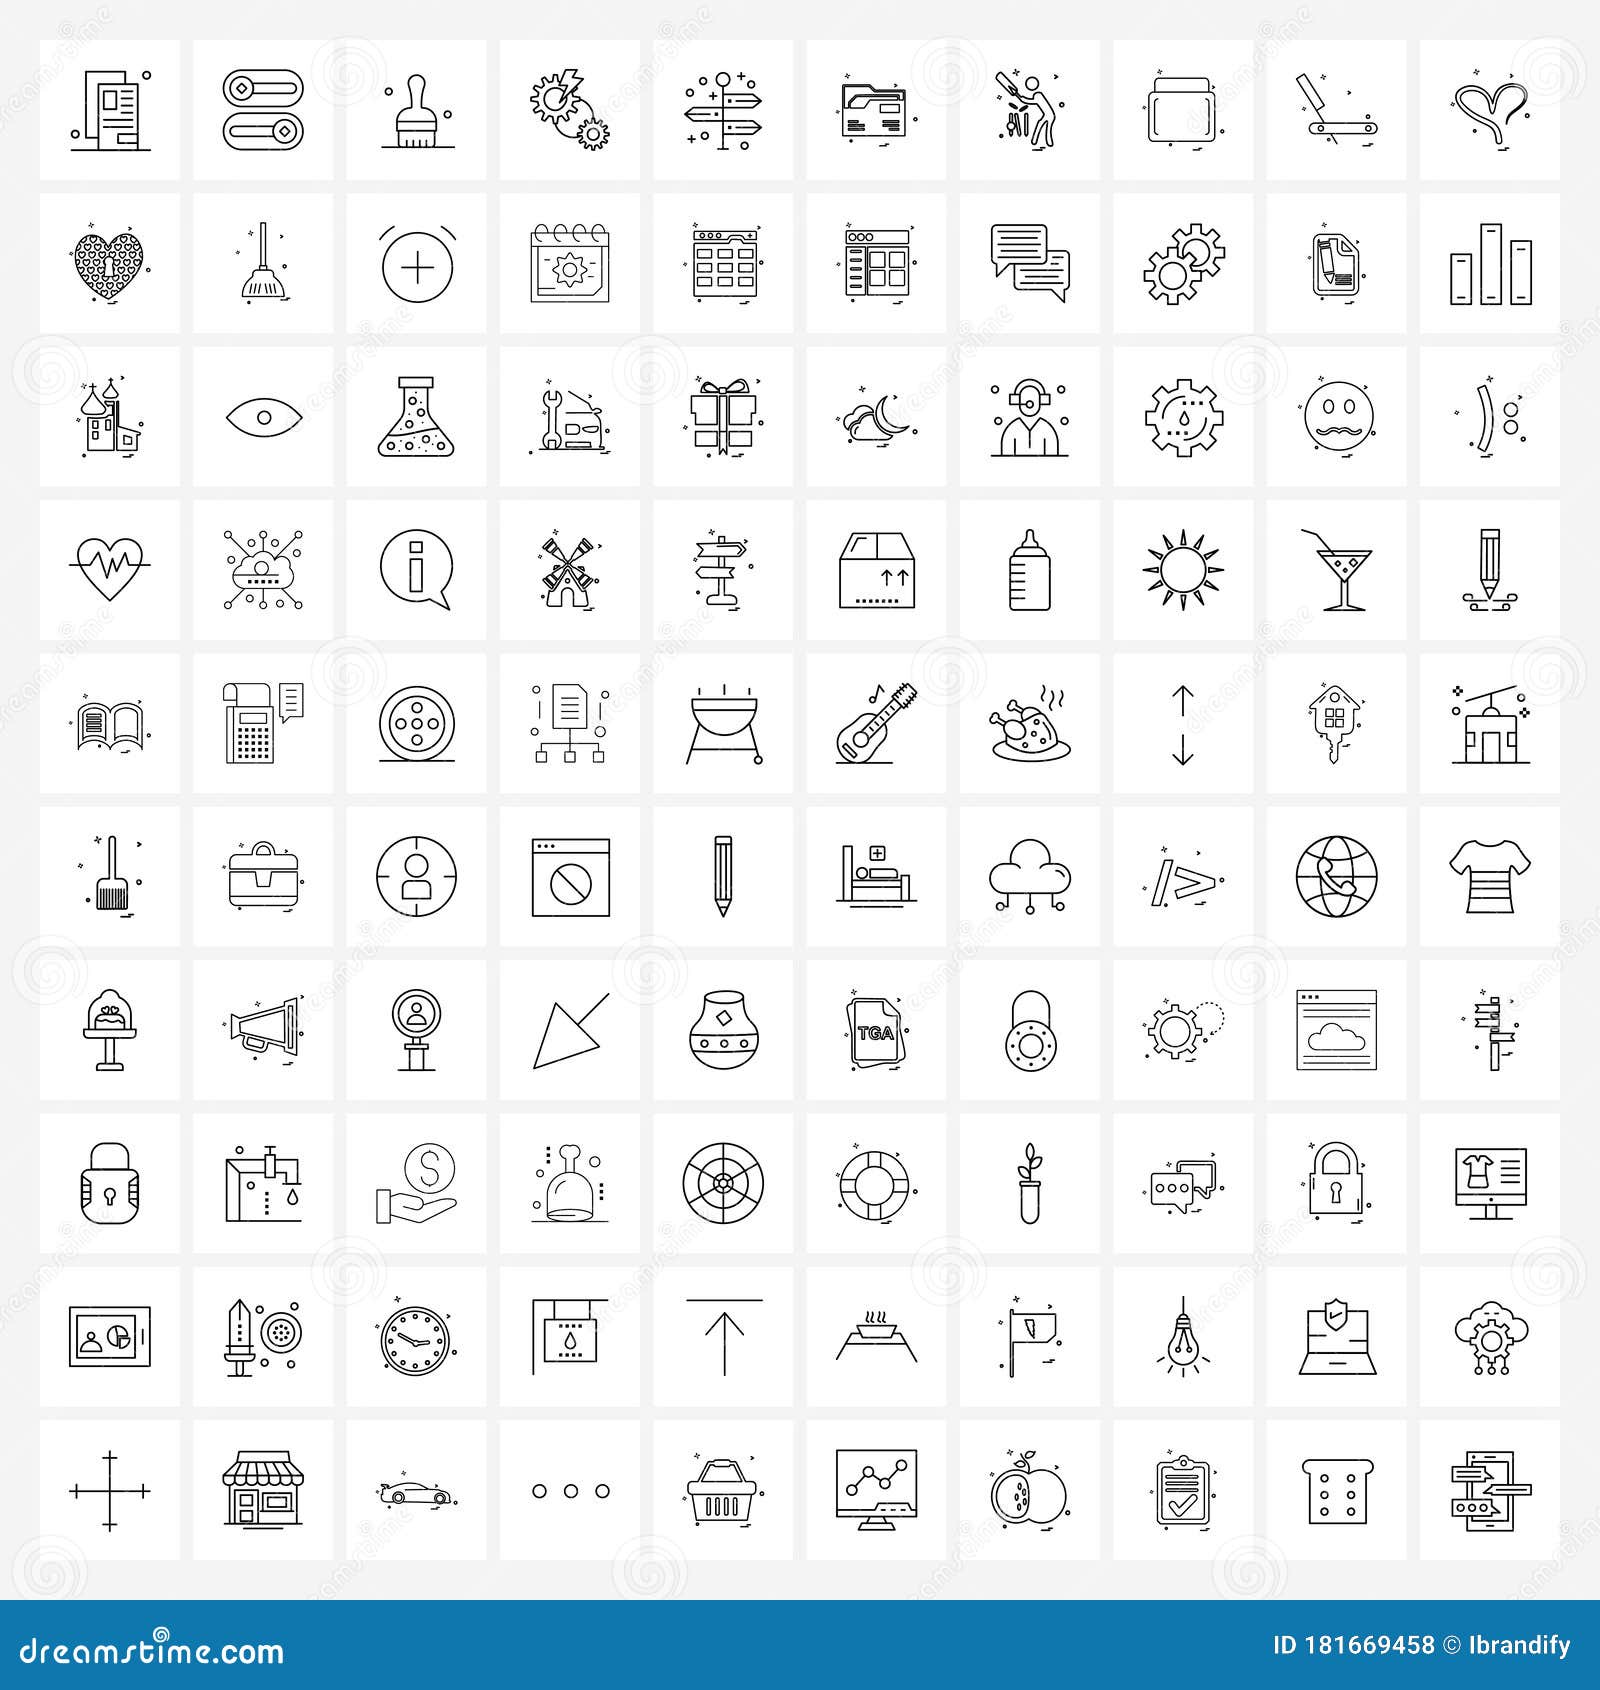 Isolated Symbols Set of 100 Simple Line Icons of Adventure, Board, Toggle,  Power, Gear Setting Stock Vector - Illustration of cosmetics, bowled:  181669458